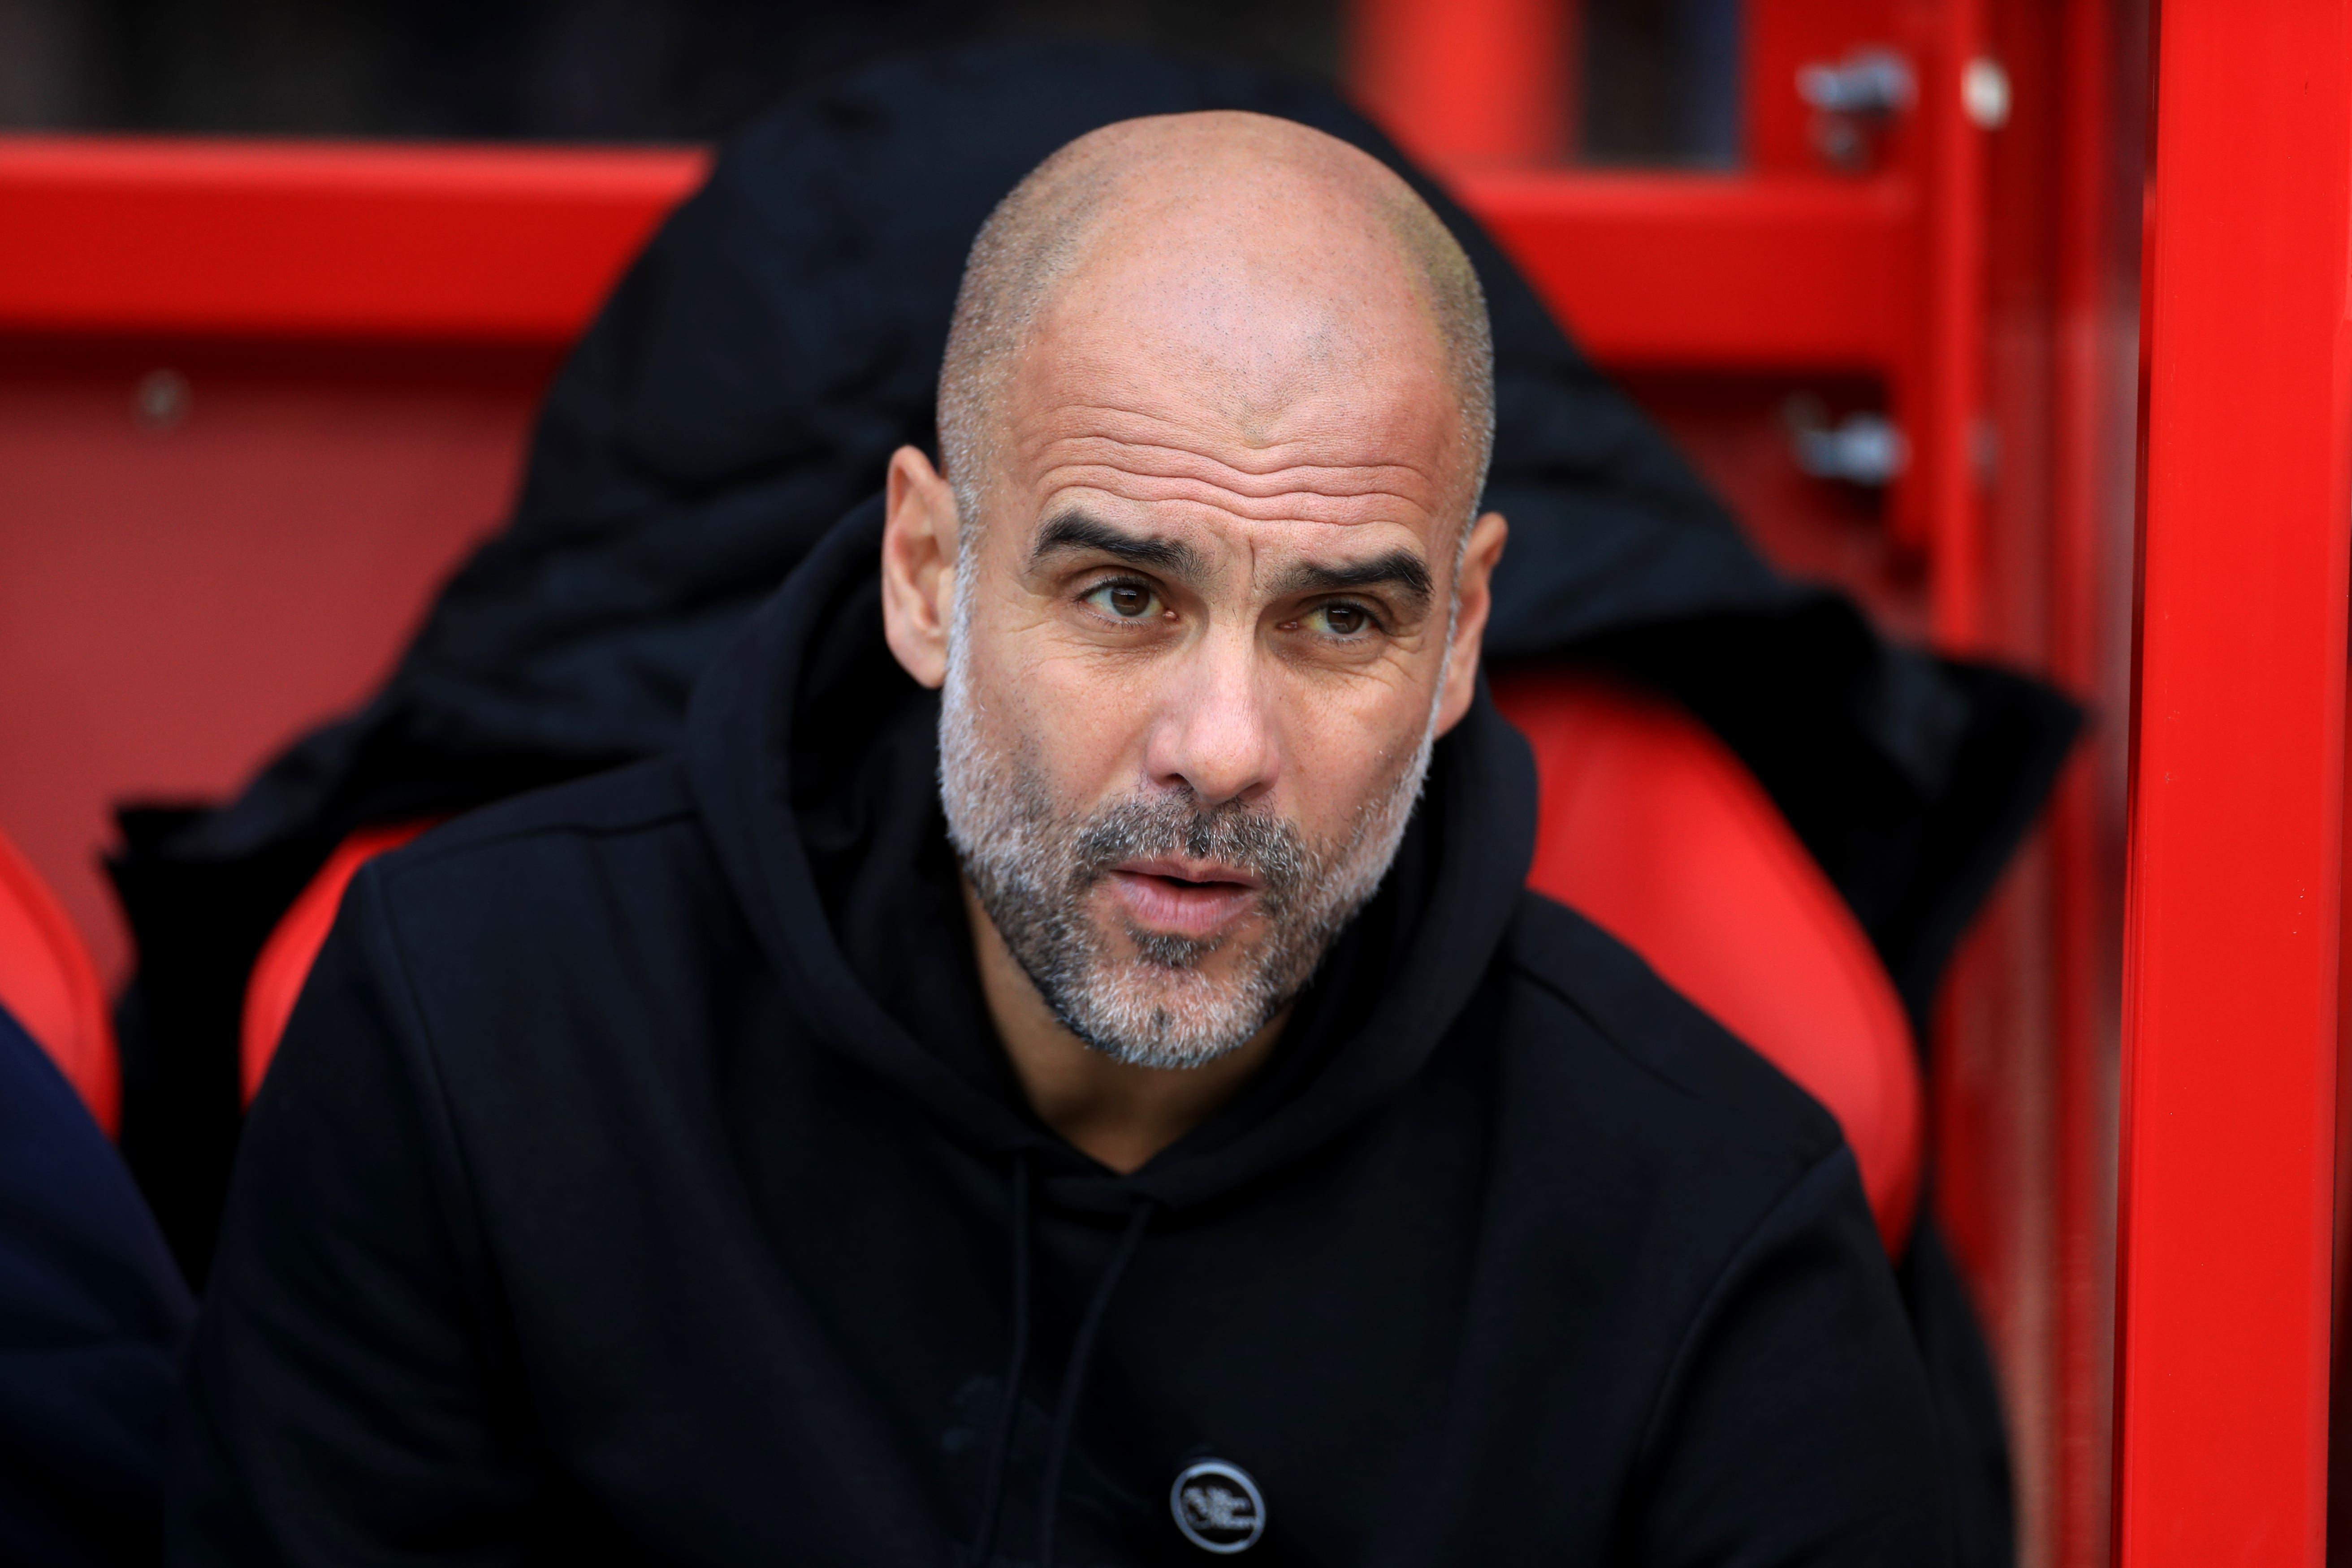 Pep Guardiola expects Carabao Cup winners Manchester United to be back challenging at the top (Bradley Collyer/PA)